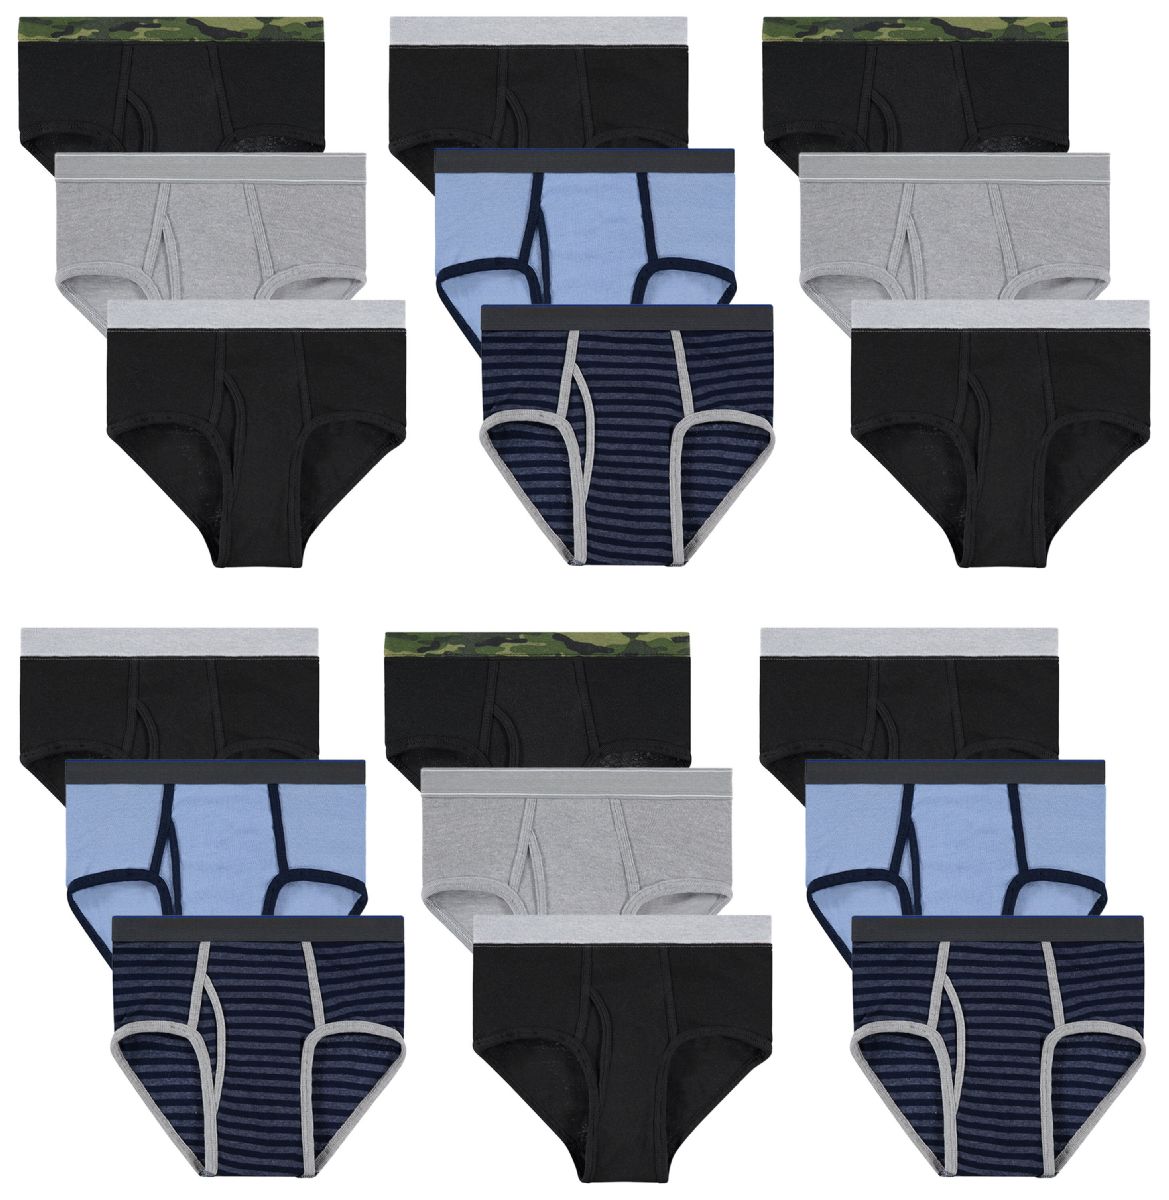 72 Pieces Boys Cotton Assorted Color And Sizes Briefs - Sizes S-Xl Assorted  - Boys Underwear - at 